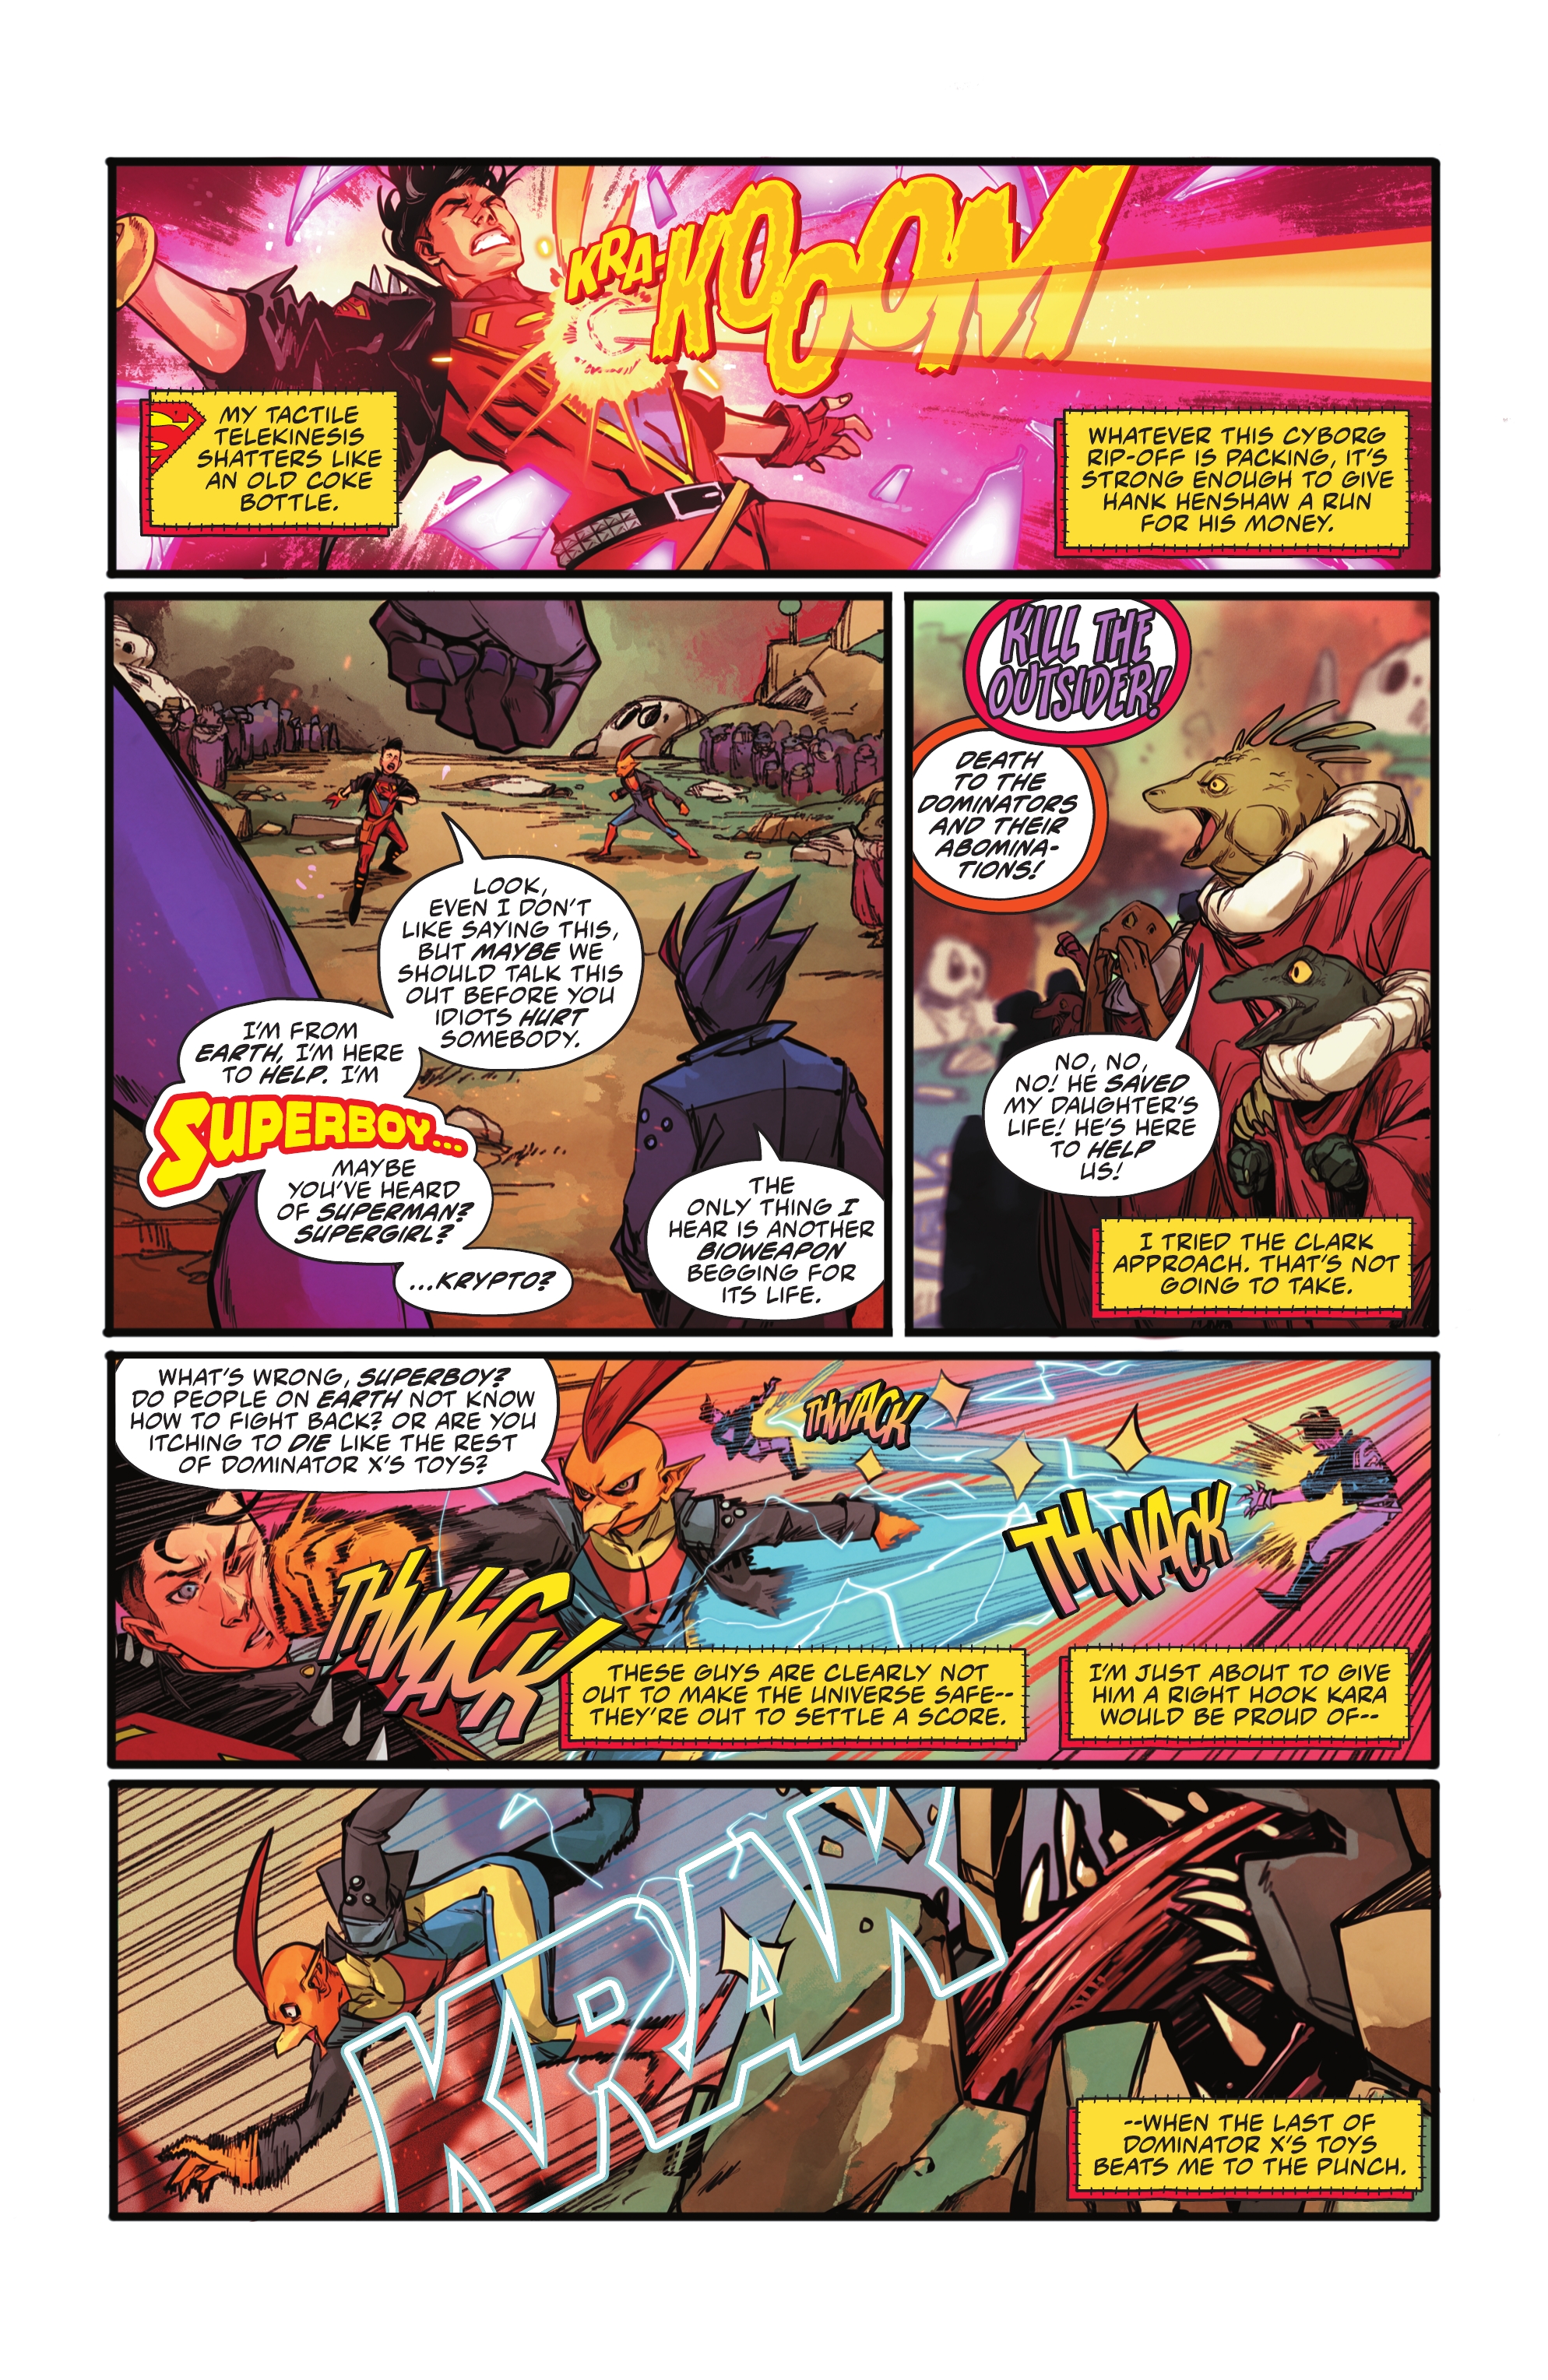 Superboy: The Man of Tomorrow (2023-): Chapter 2 - Page 4